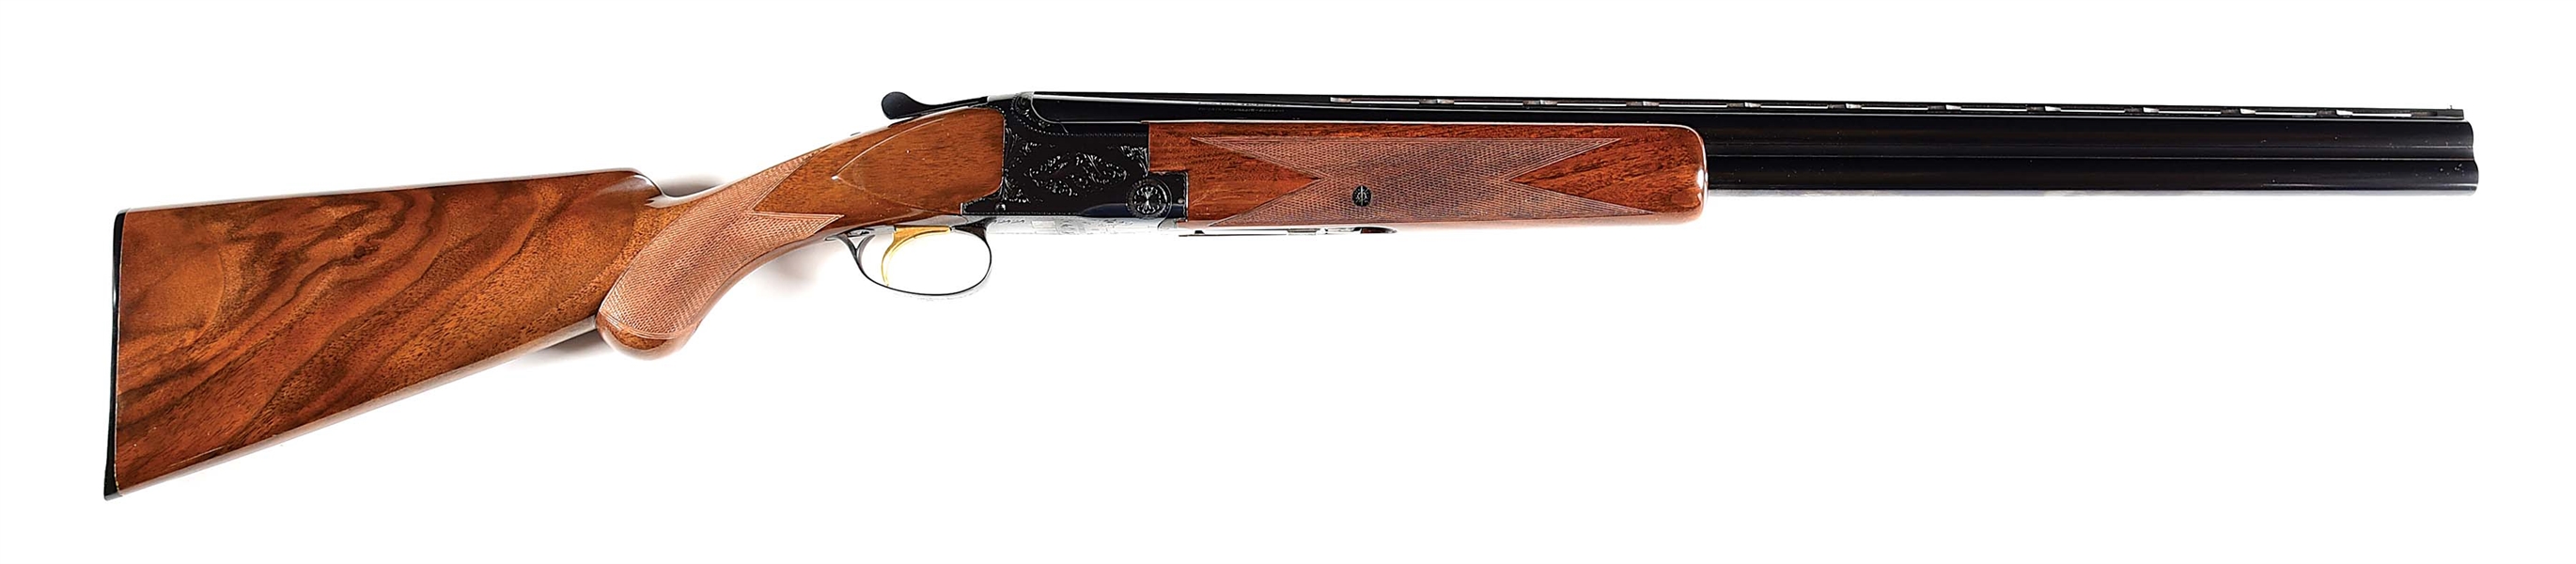 (M) BROWNING SUPERPOSED 12 GA OVER/UNDER SHOTGUN WITH BOX